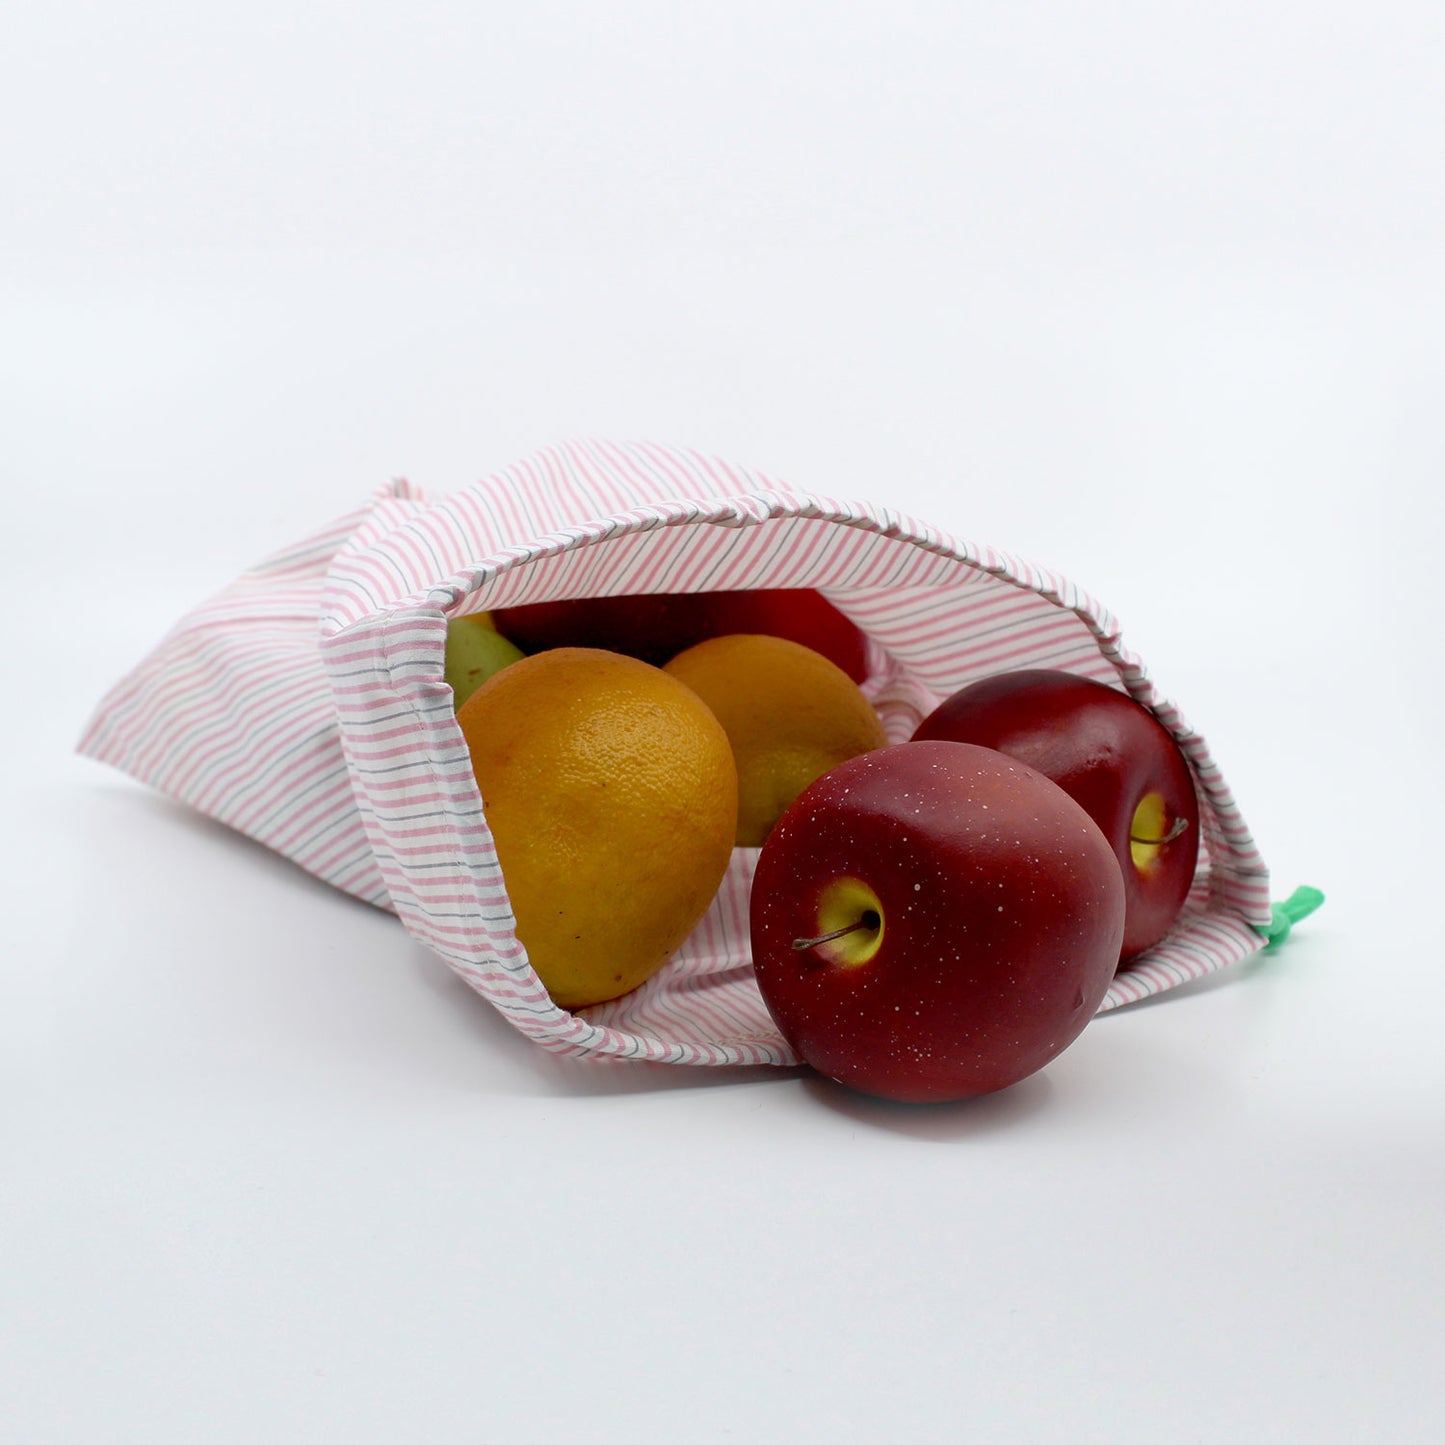 upcycled produce bag with fruit spilling out